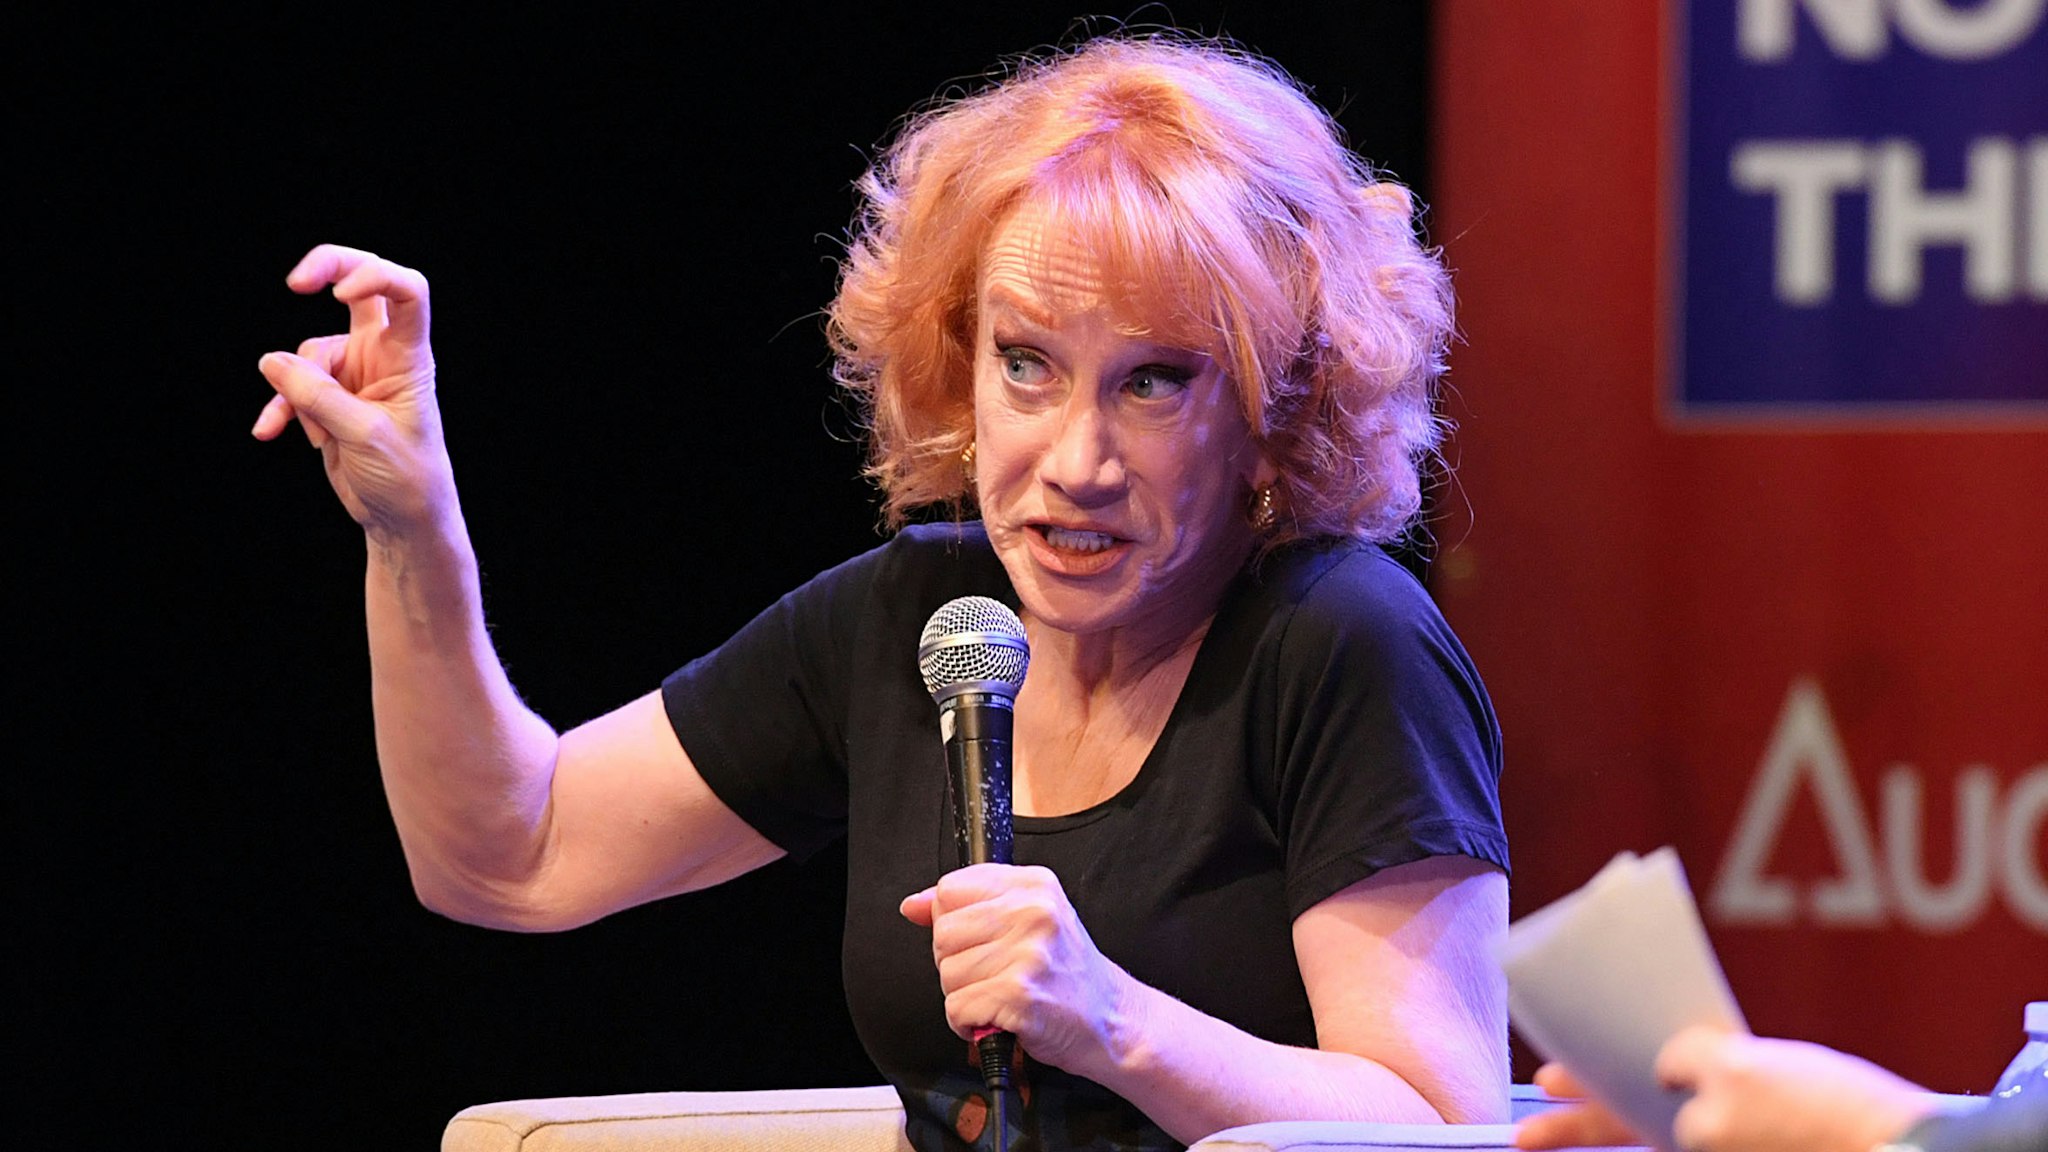 LOS ANGELES, CALIFORNIA - NOVEMBER 01: Comedian Kathy Griffin speaks at "Mea Culpa Live with Michael Cohen" at El Rey Theatre on November 01, 2022 in Los Angeles, California.